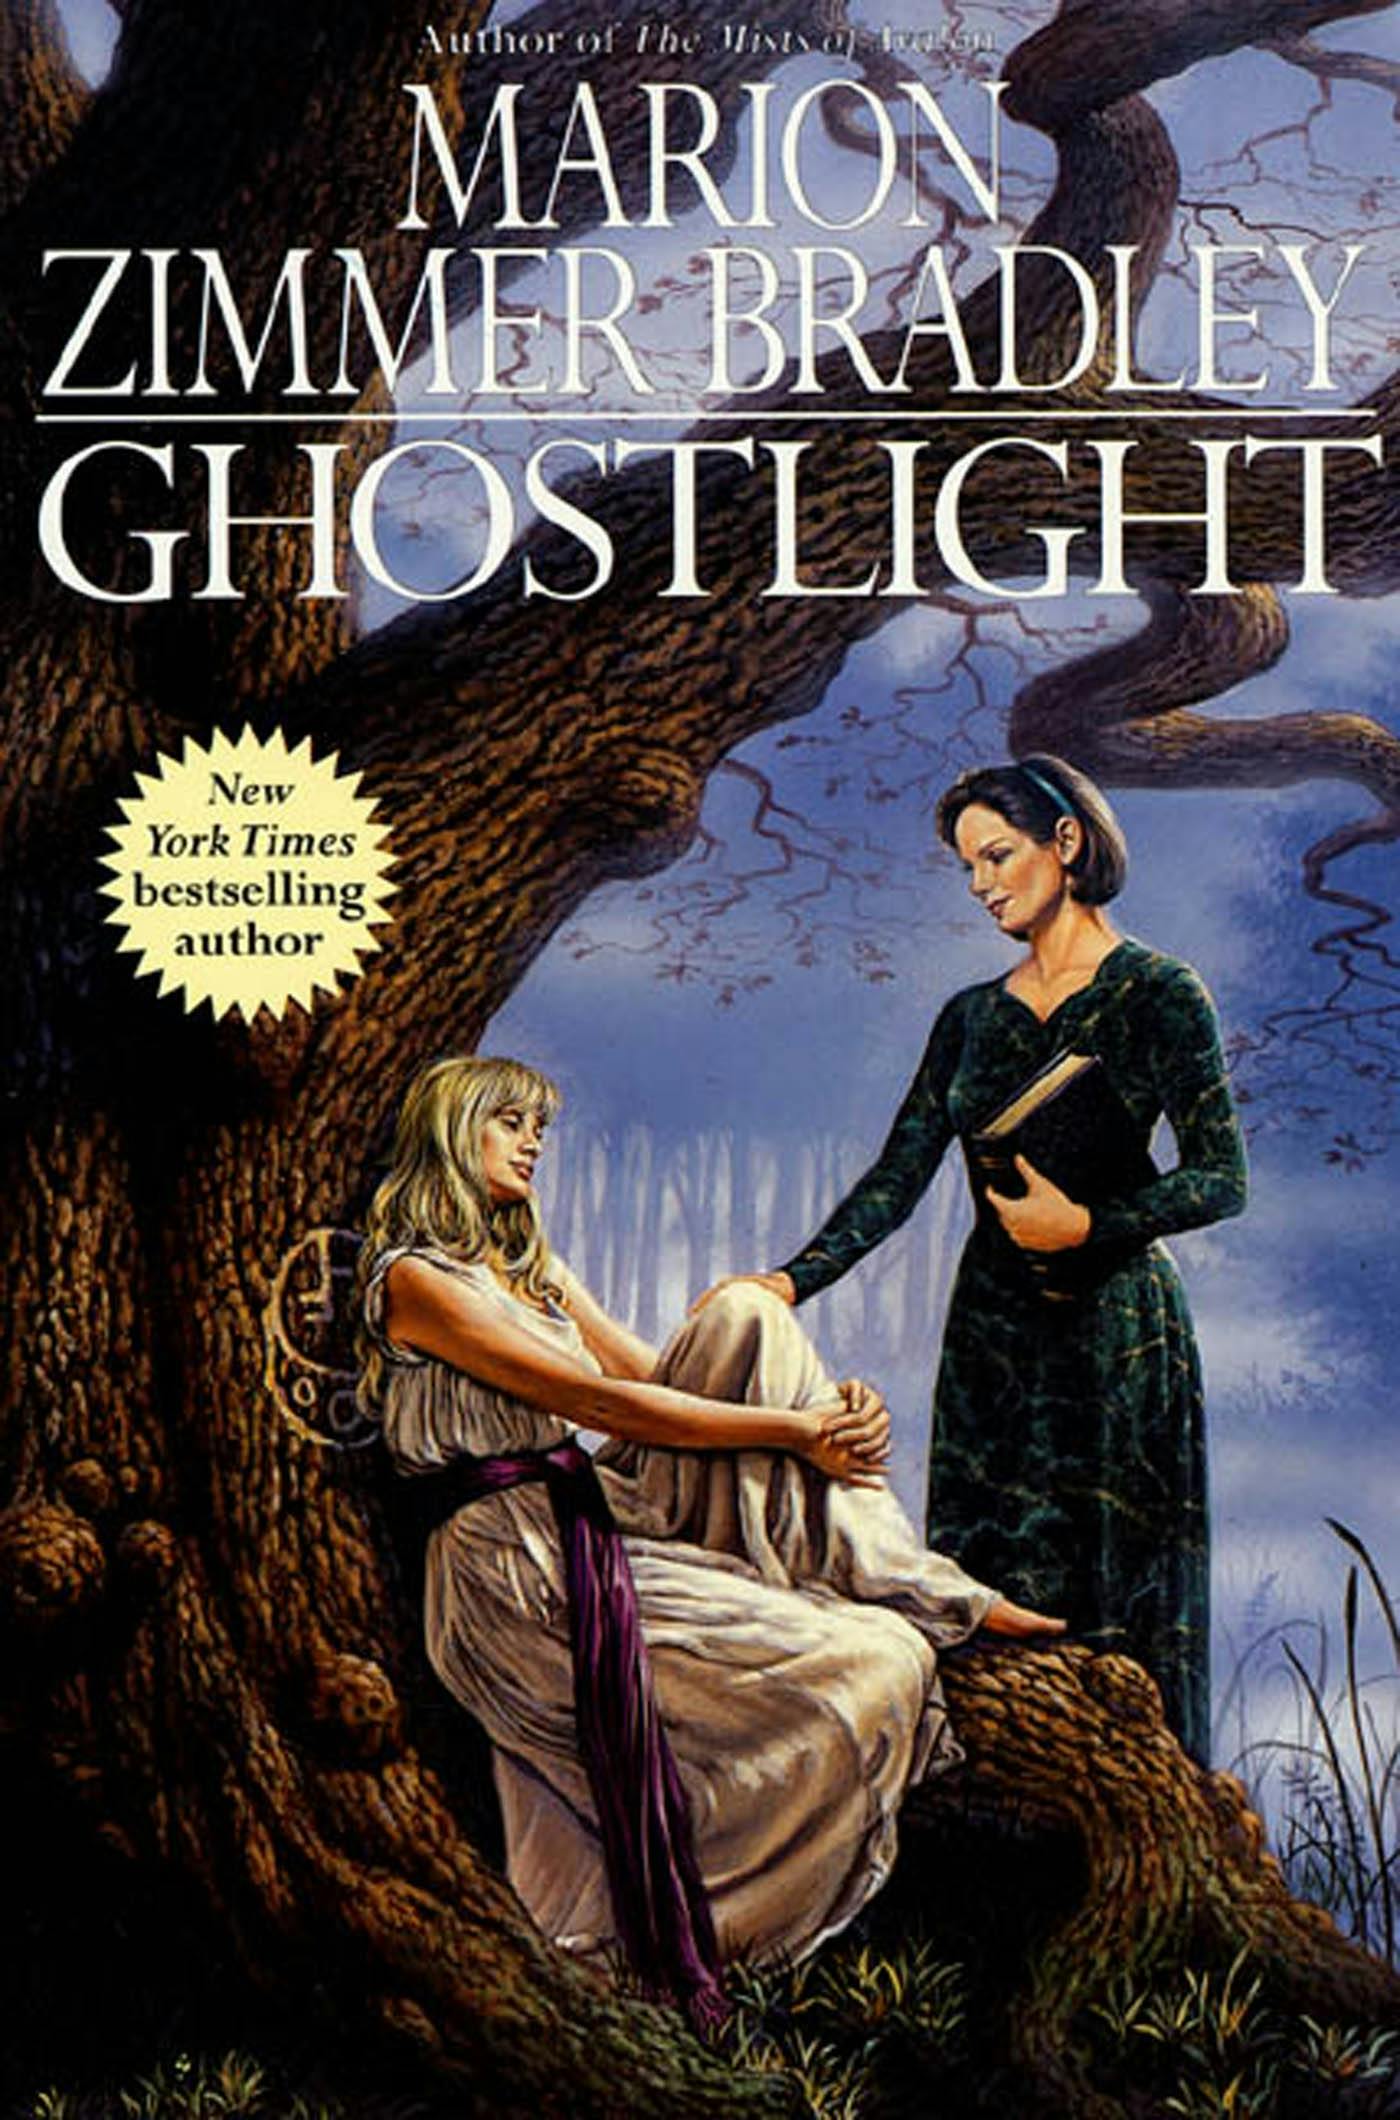 Cover for the book titled as: Ghostlight